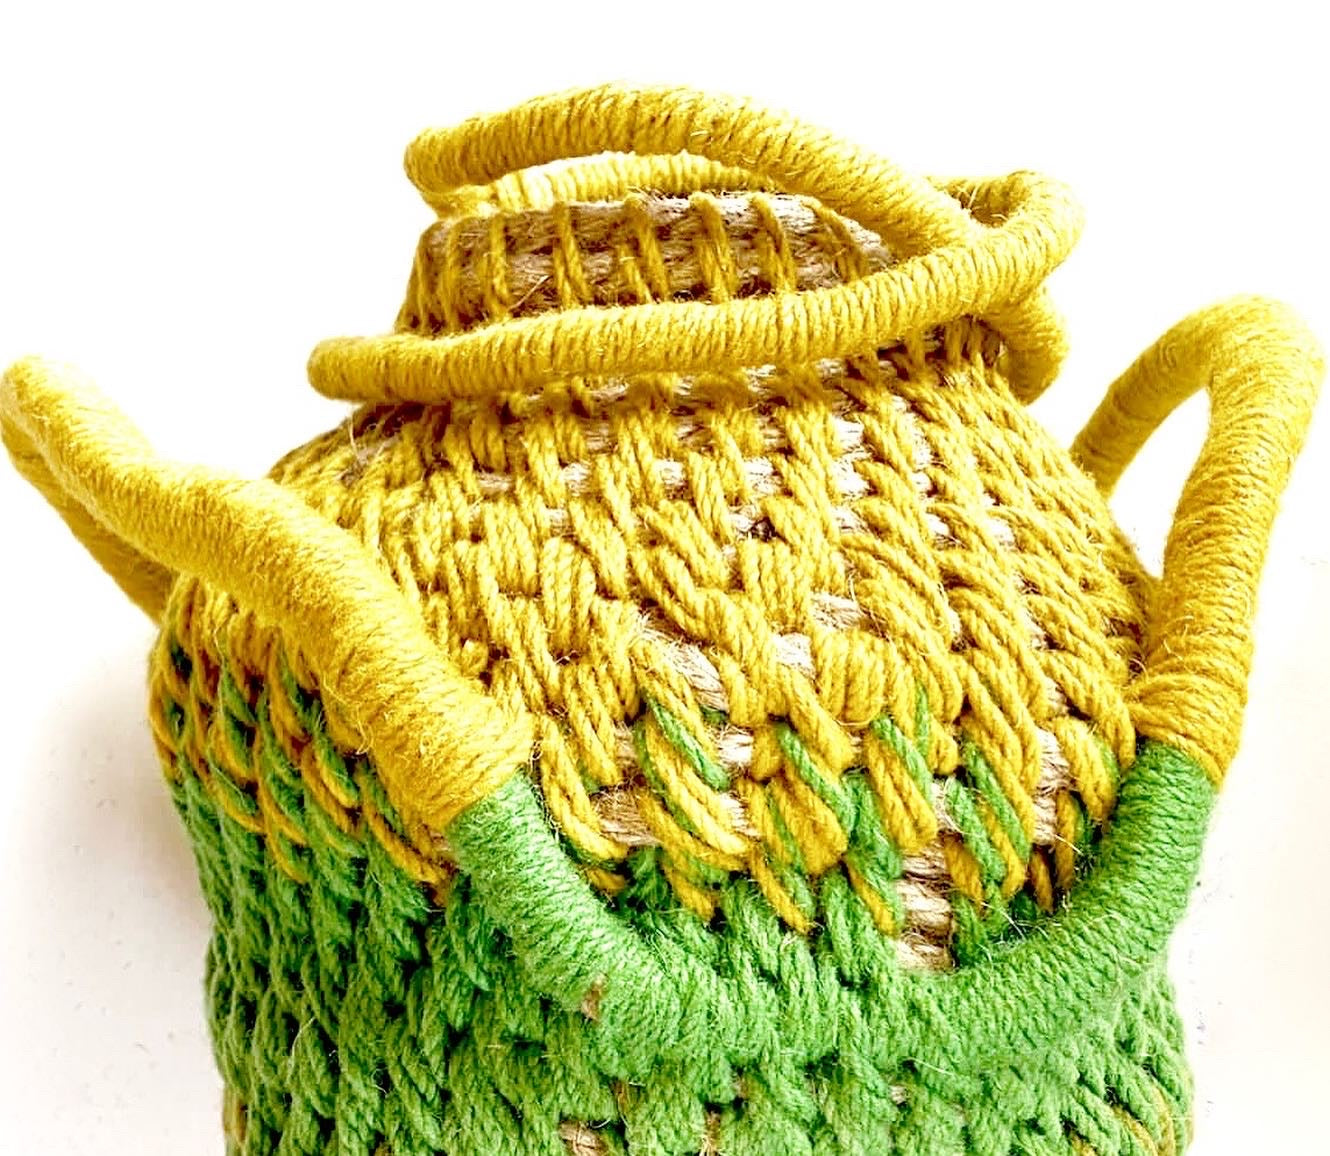 Textile Basketry Workshop with Maria in Algarve, Portimão, Portugal by subcultours